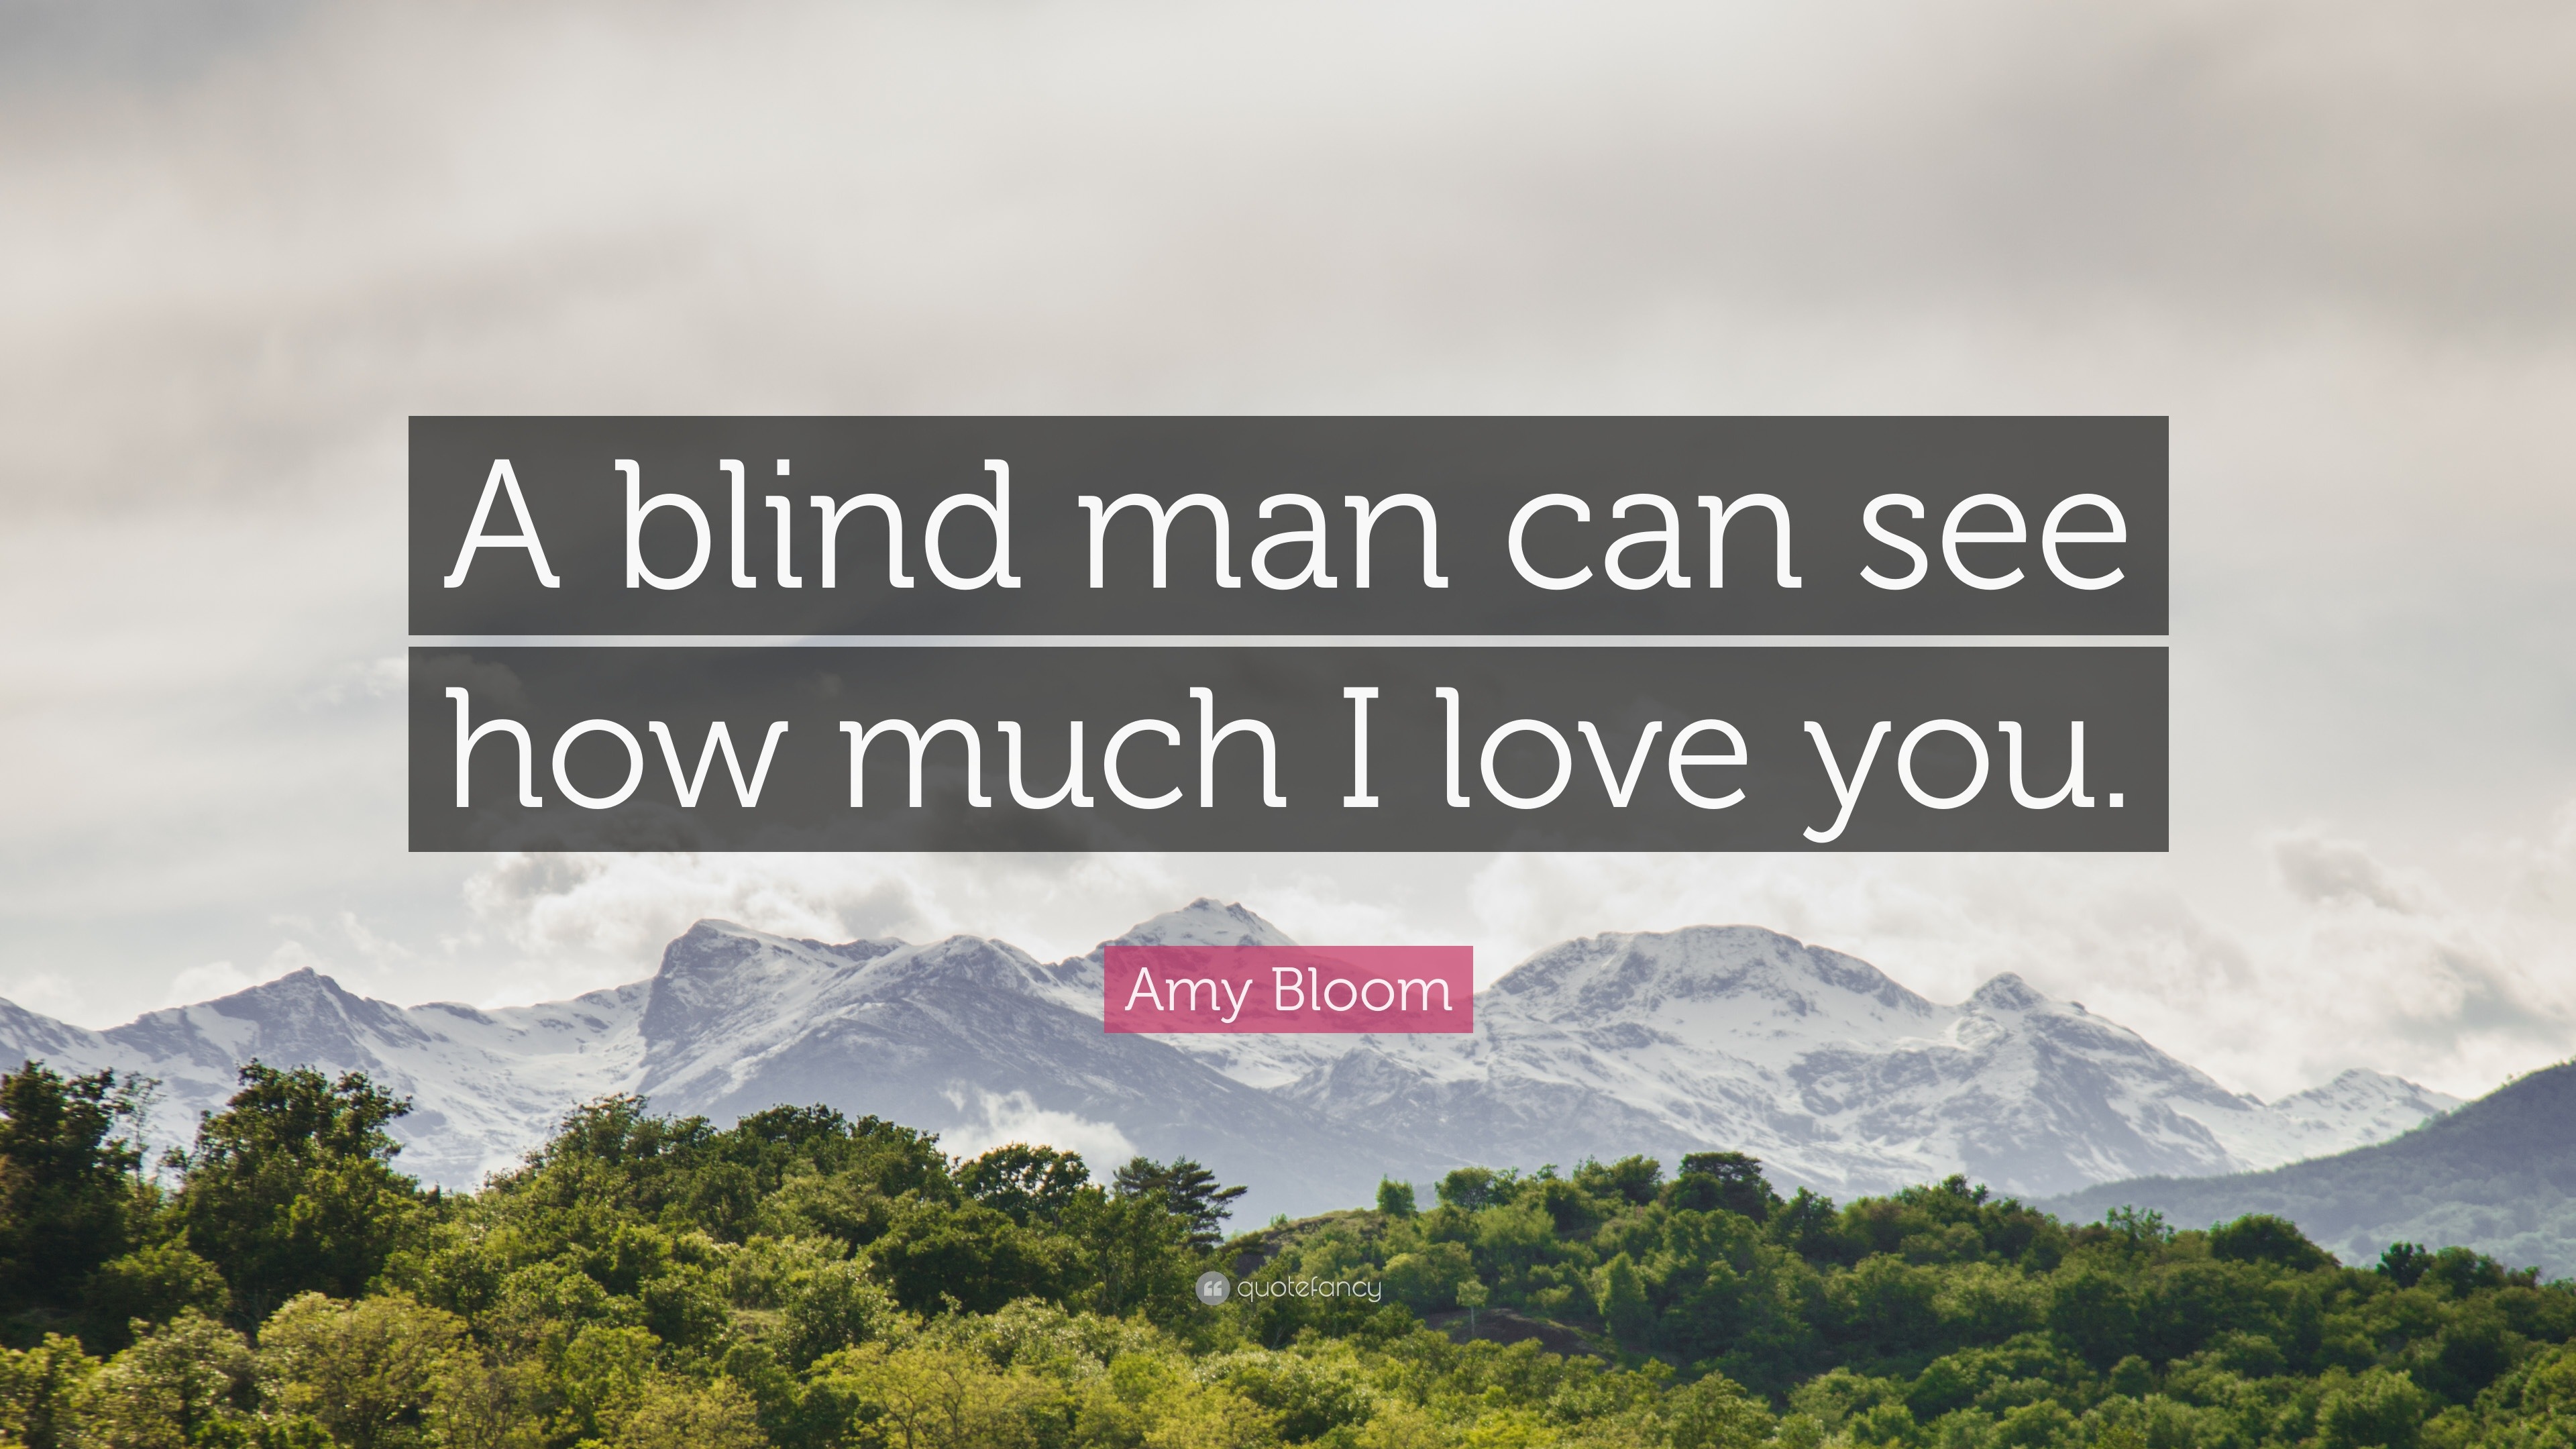 Amy Bloom Quote “A blind man can see how much I love you